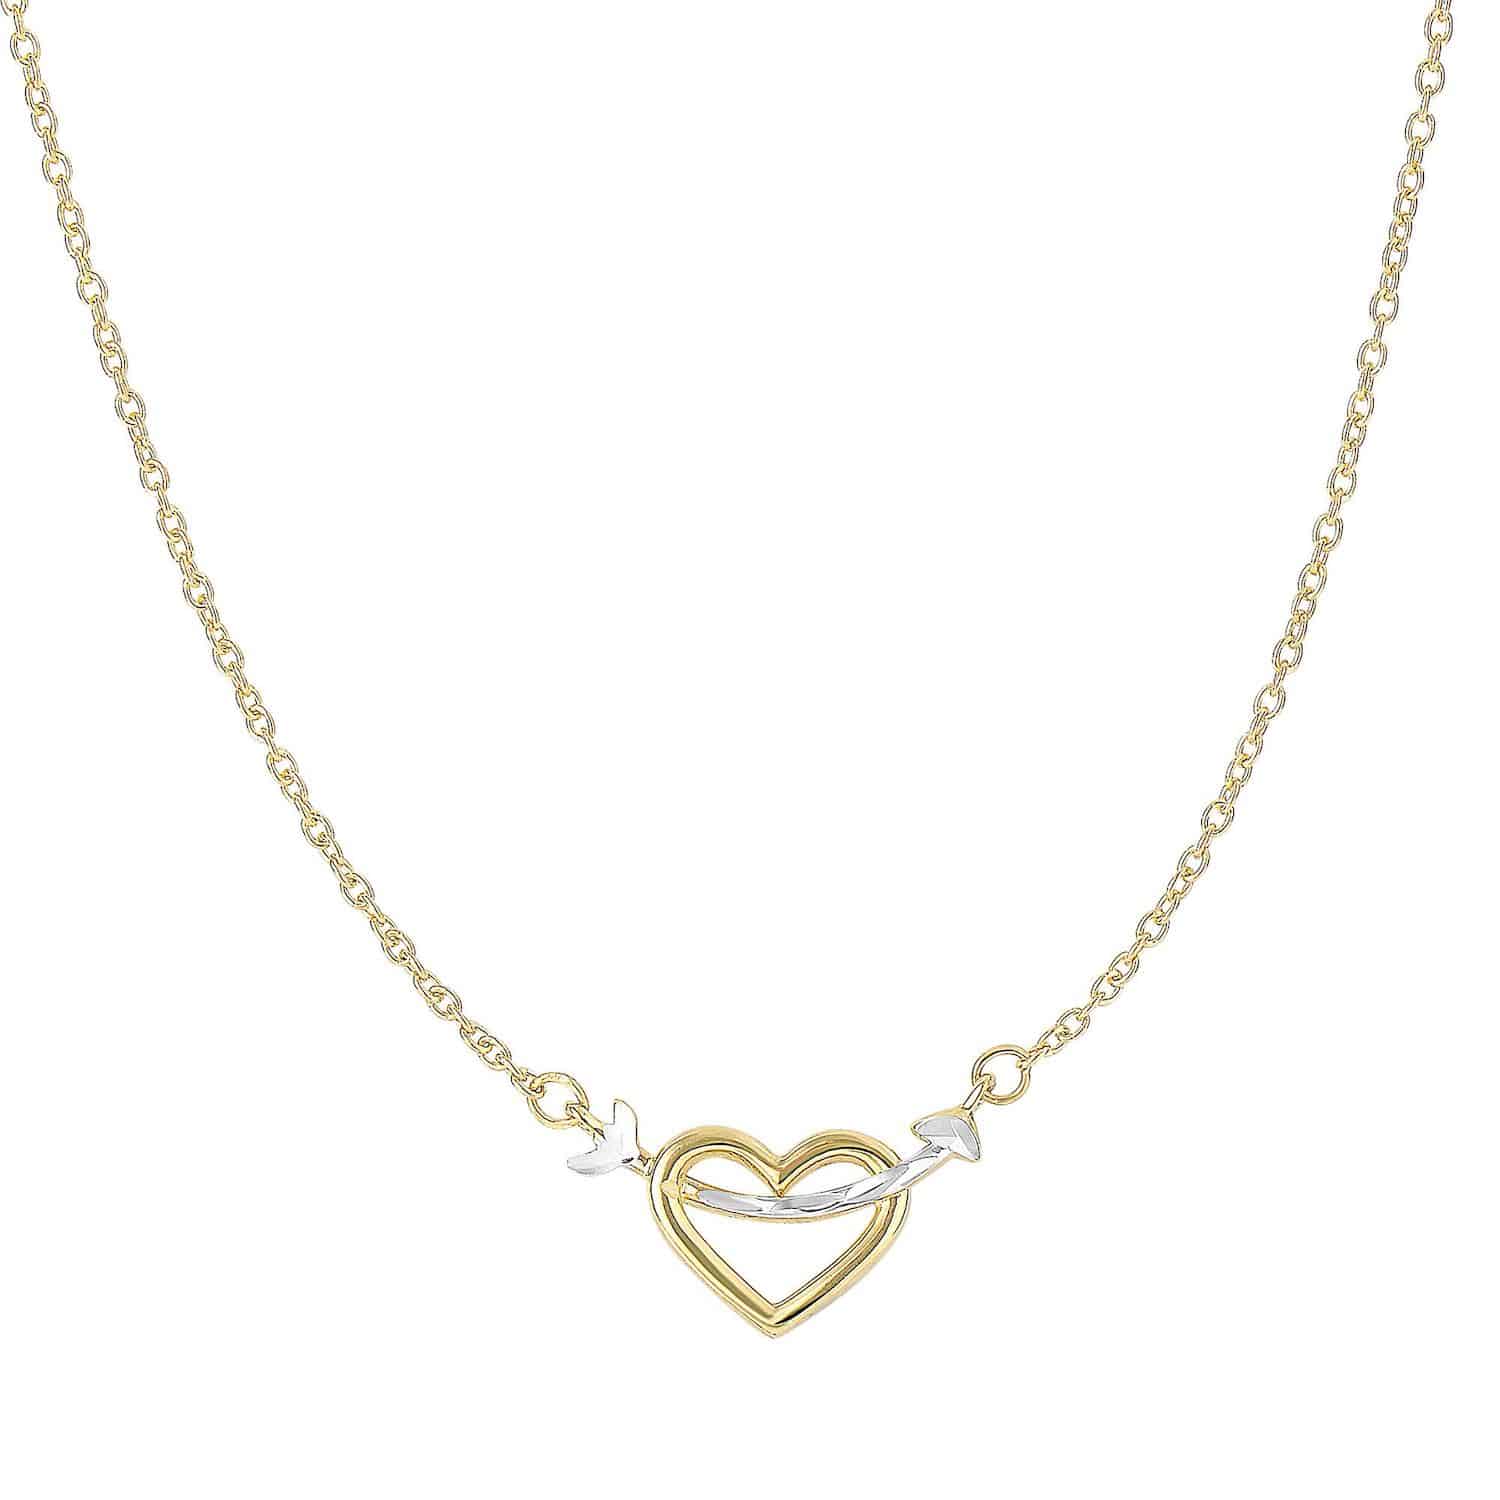 14K Gold Yellow White Two-Tone Heart Arrow Pendant Chain Necklace 18"